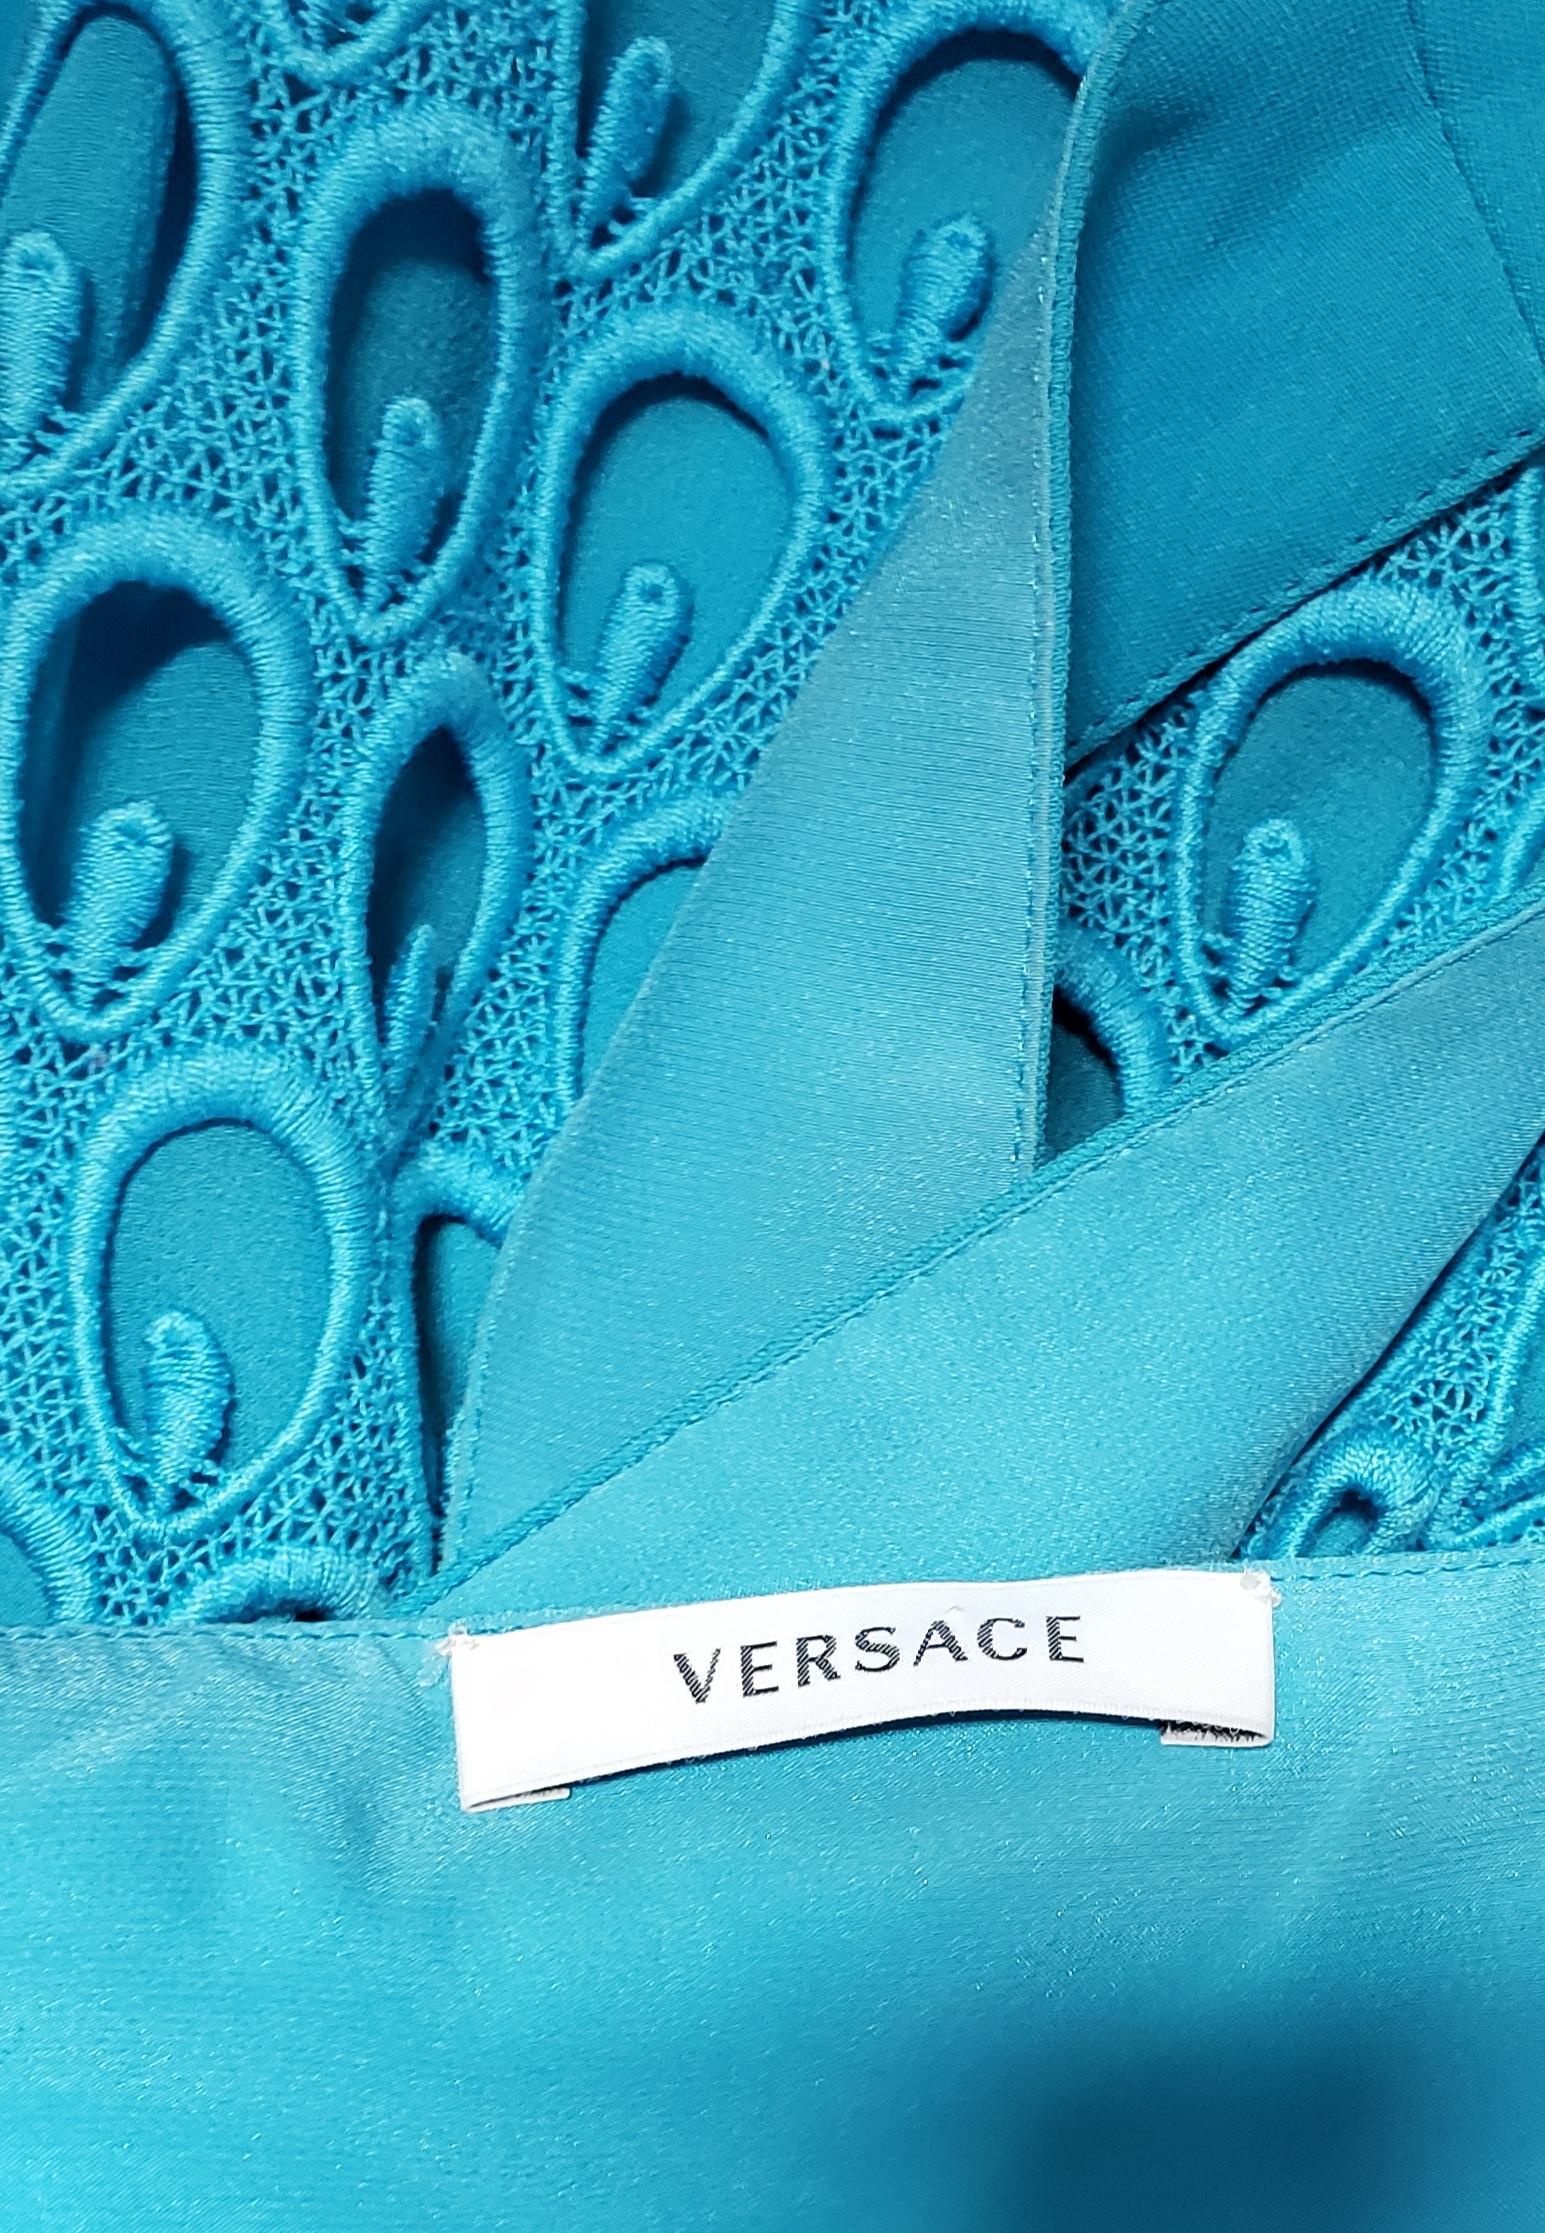 S/S 2011 look # 34 NEW VERSACE BLUE SILK EMBROIDERED Dress 38 - 2 For Sale 3